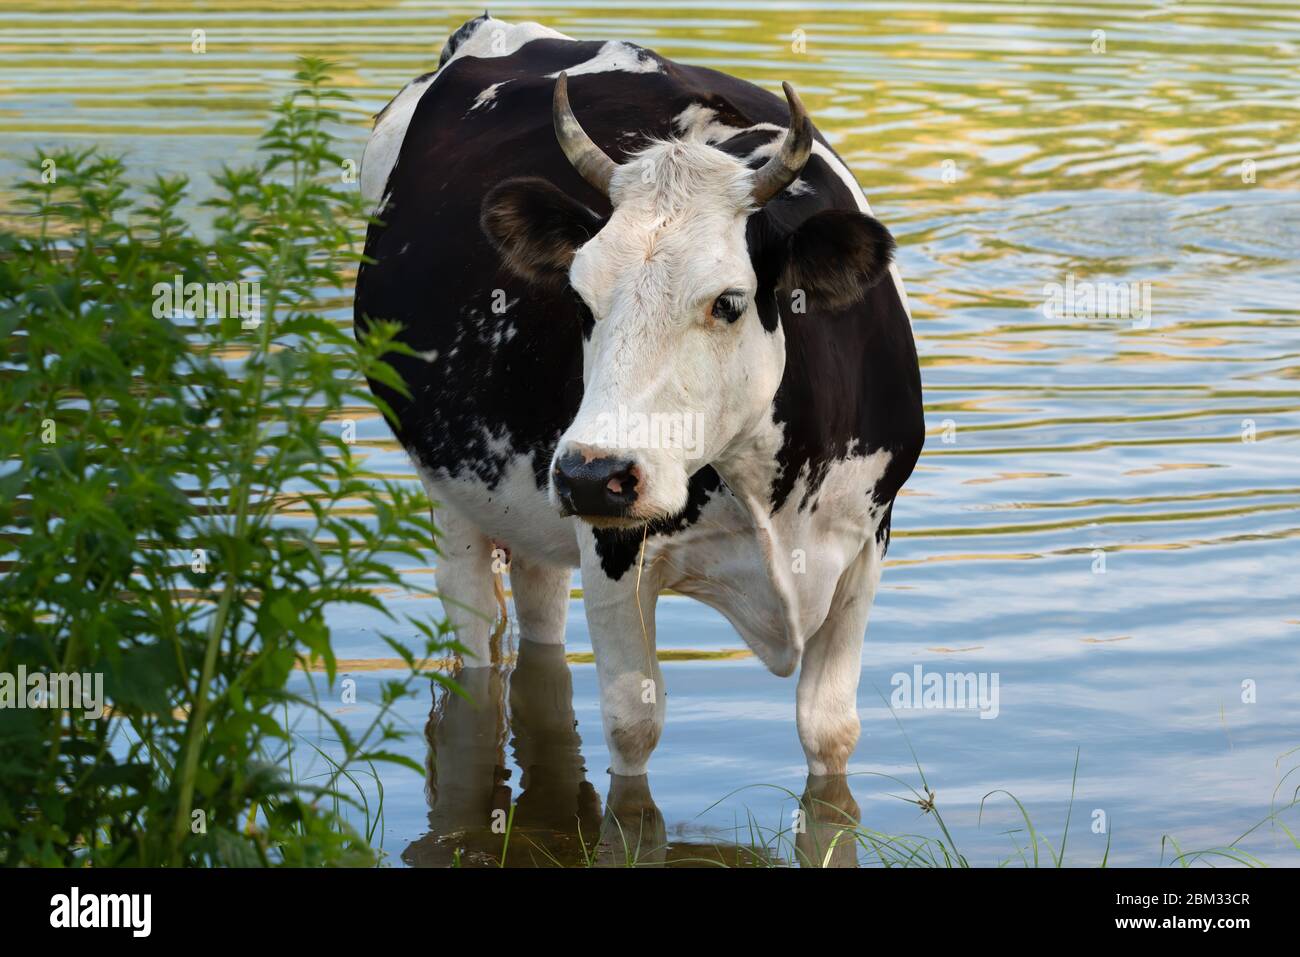 Black and White cow standing in the water in the blue lake. Stock Photo